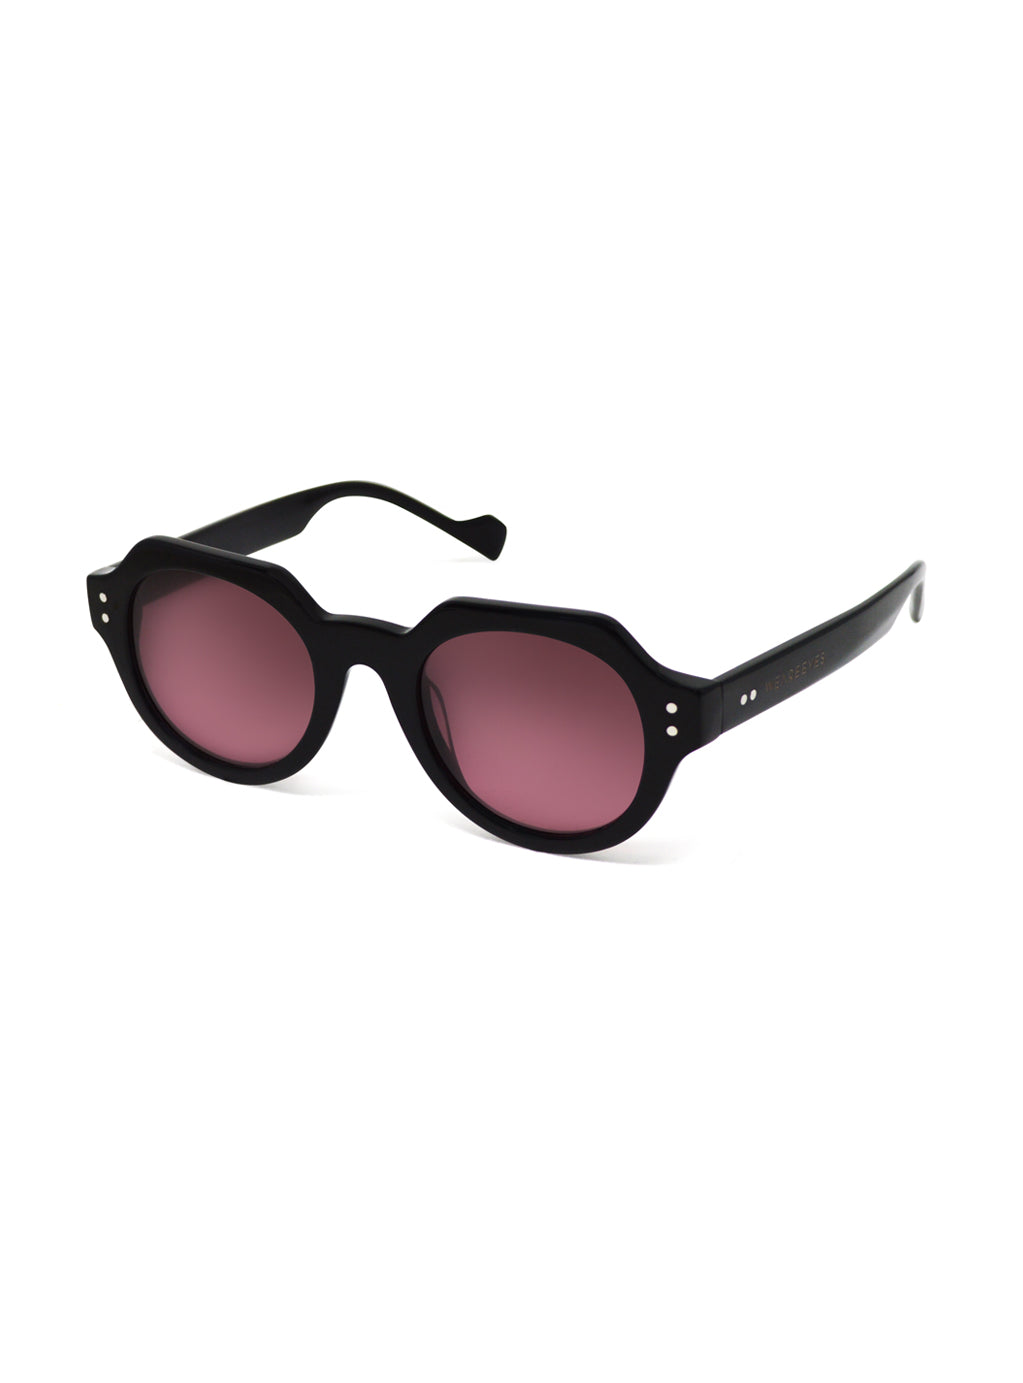 Helios Black With Pink Lenses